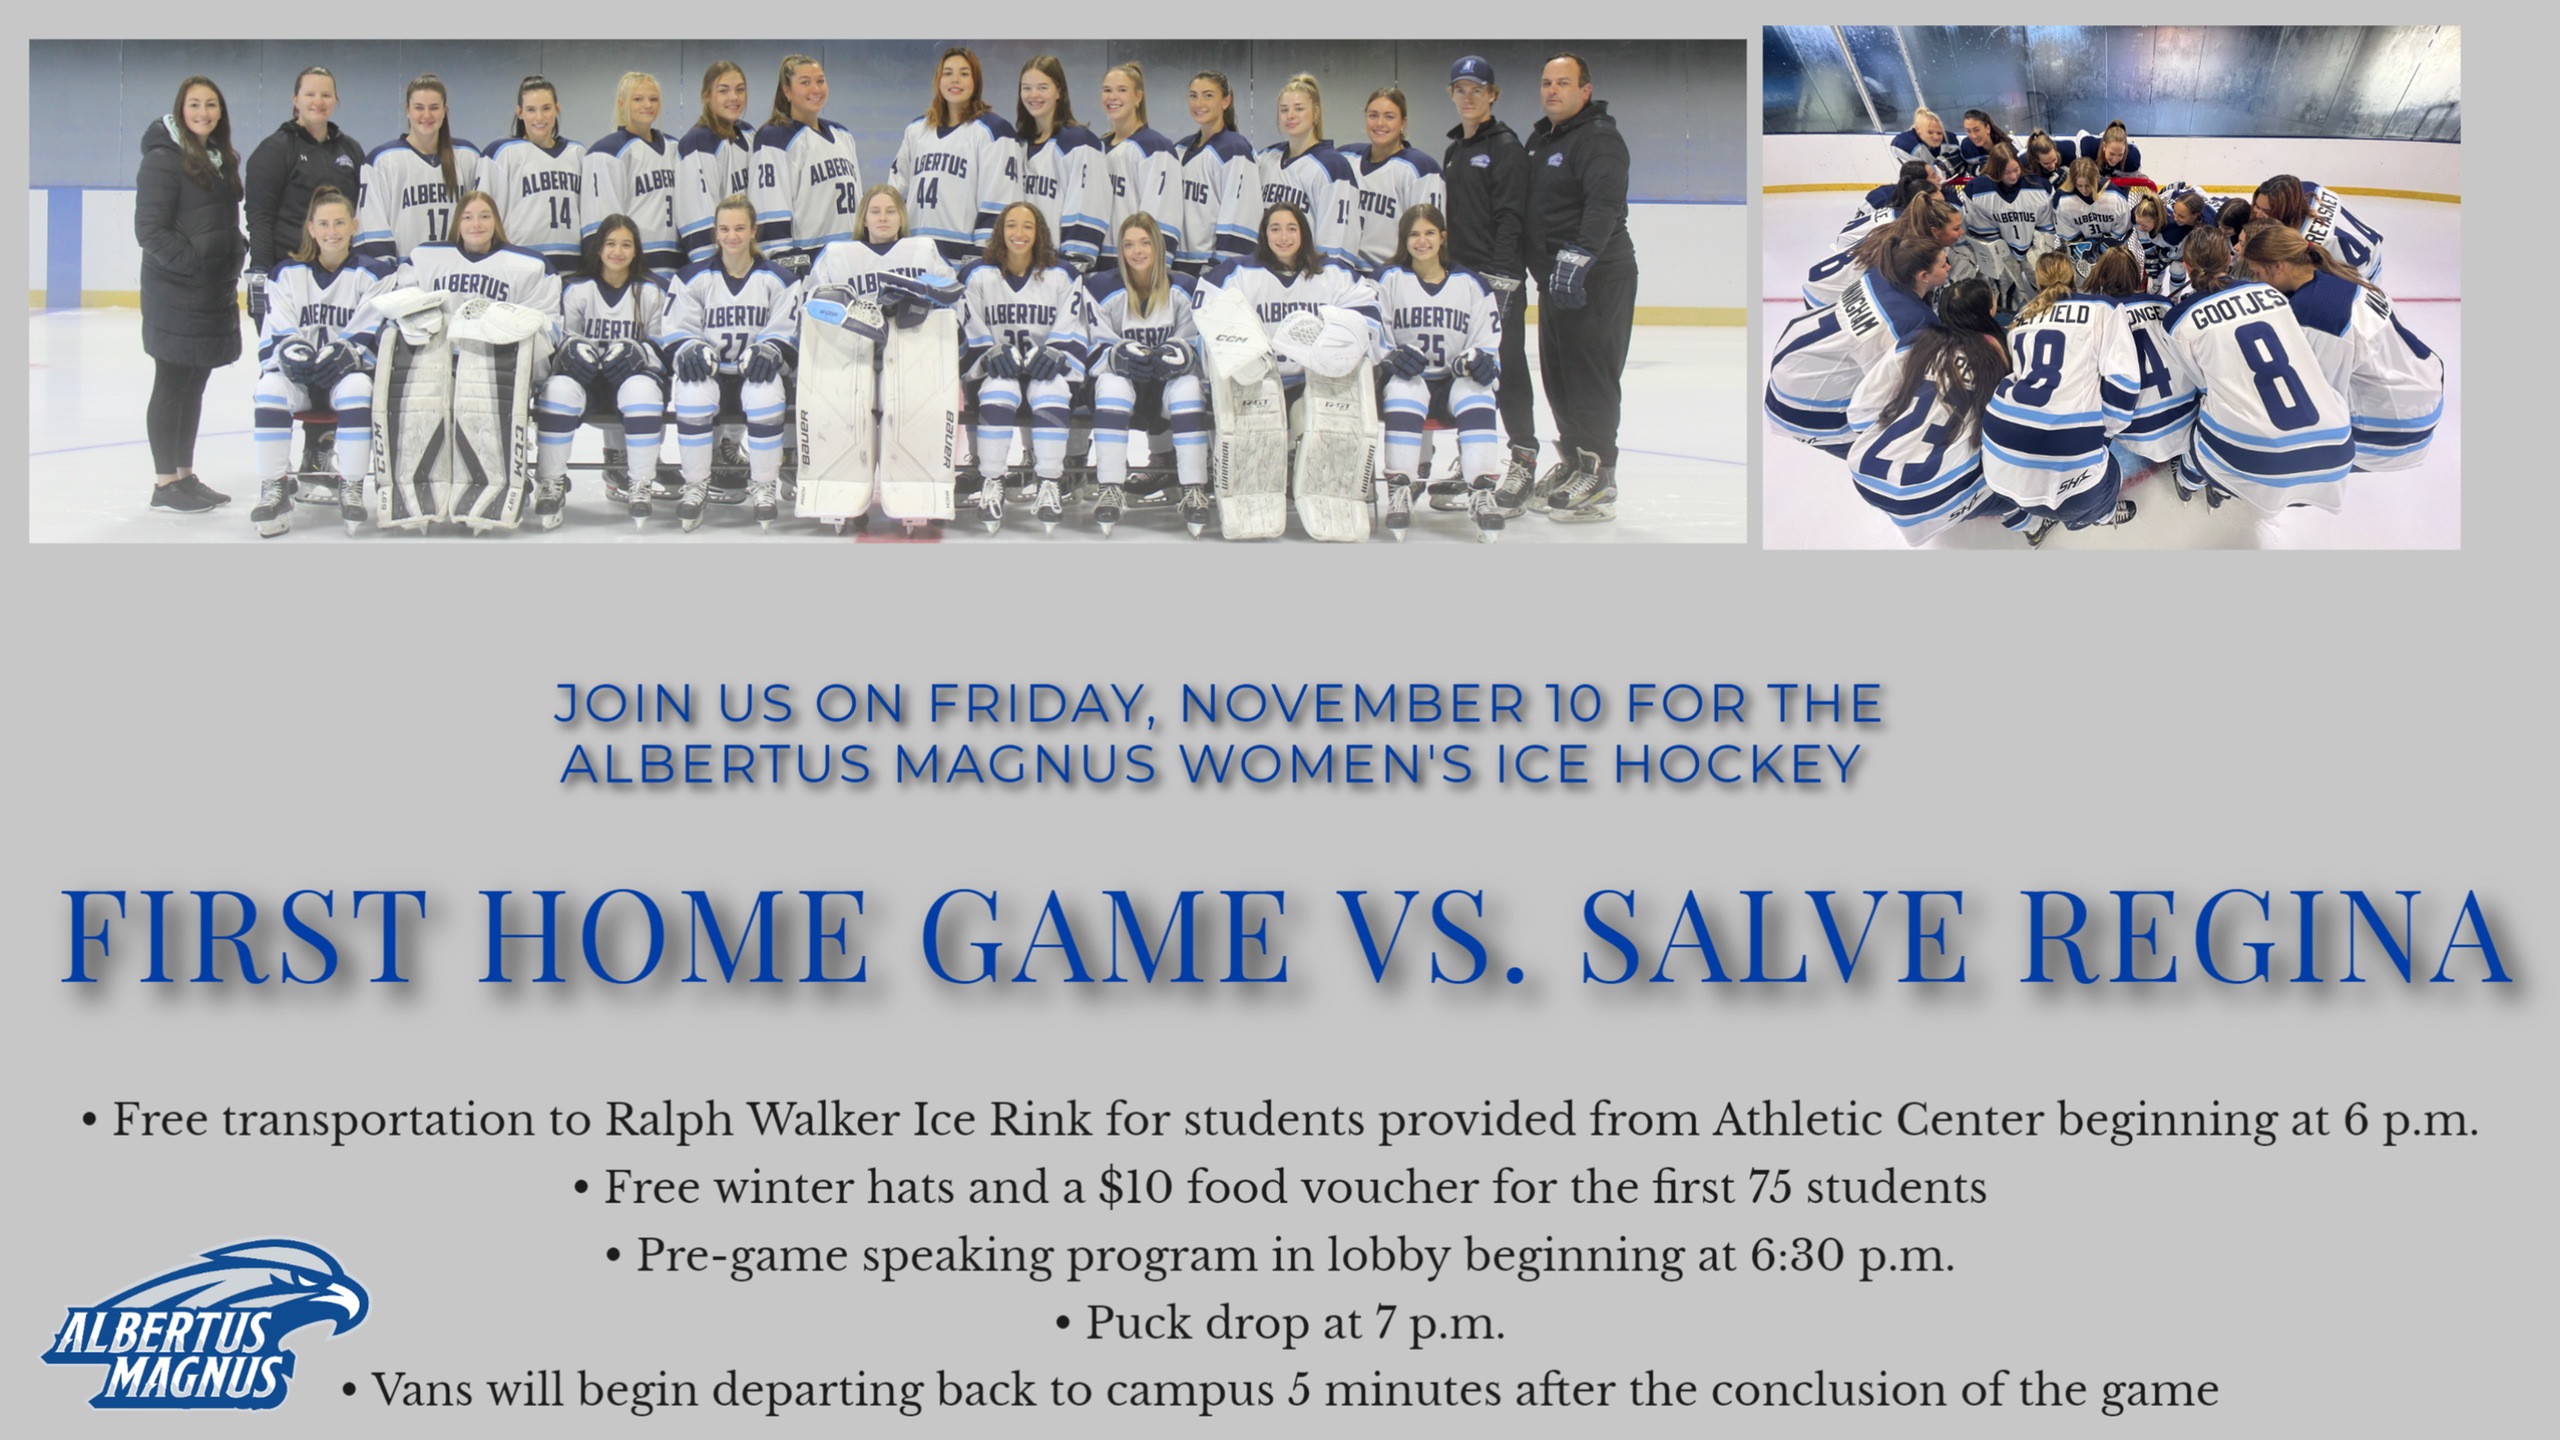 Join Us For The Women's Ice Hockey Inaugural Home Game On Friday, November 10